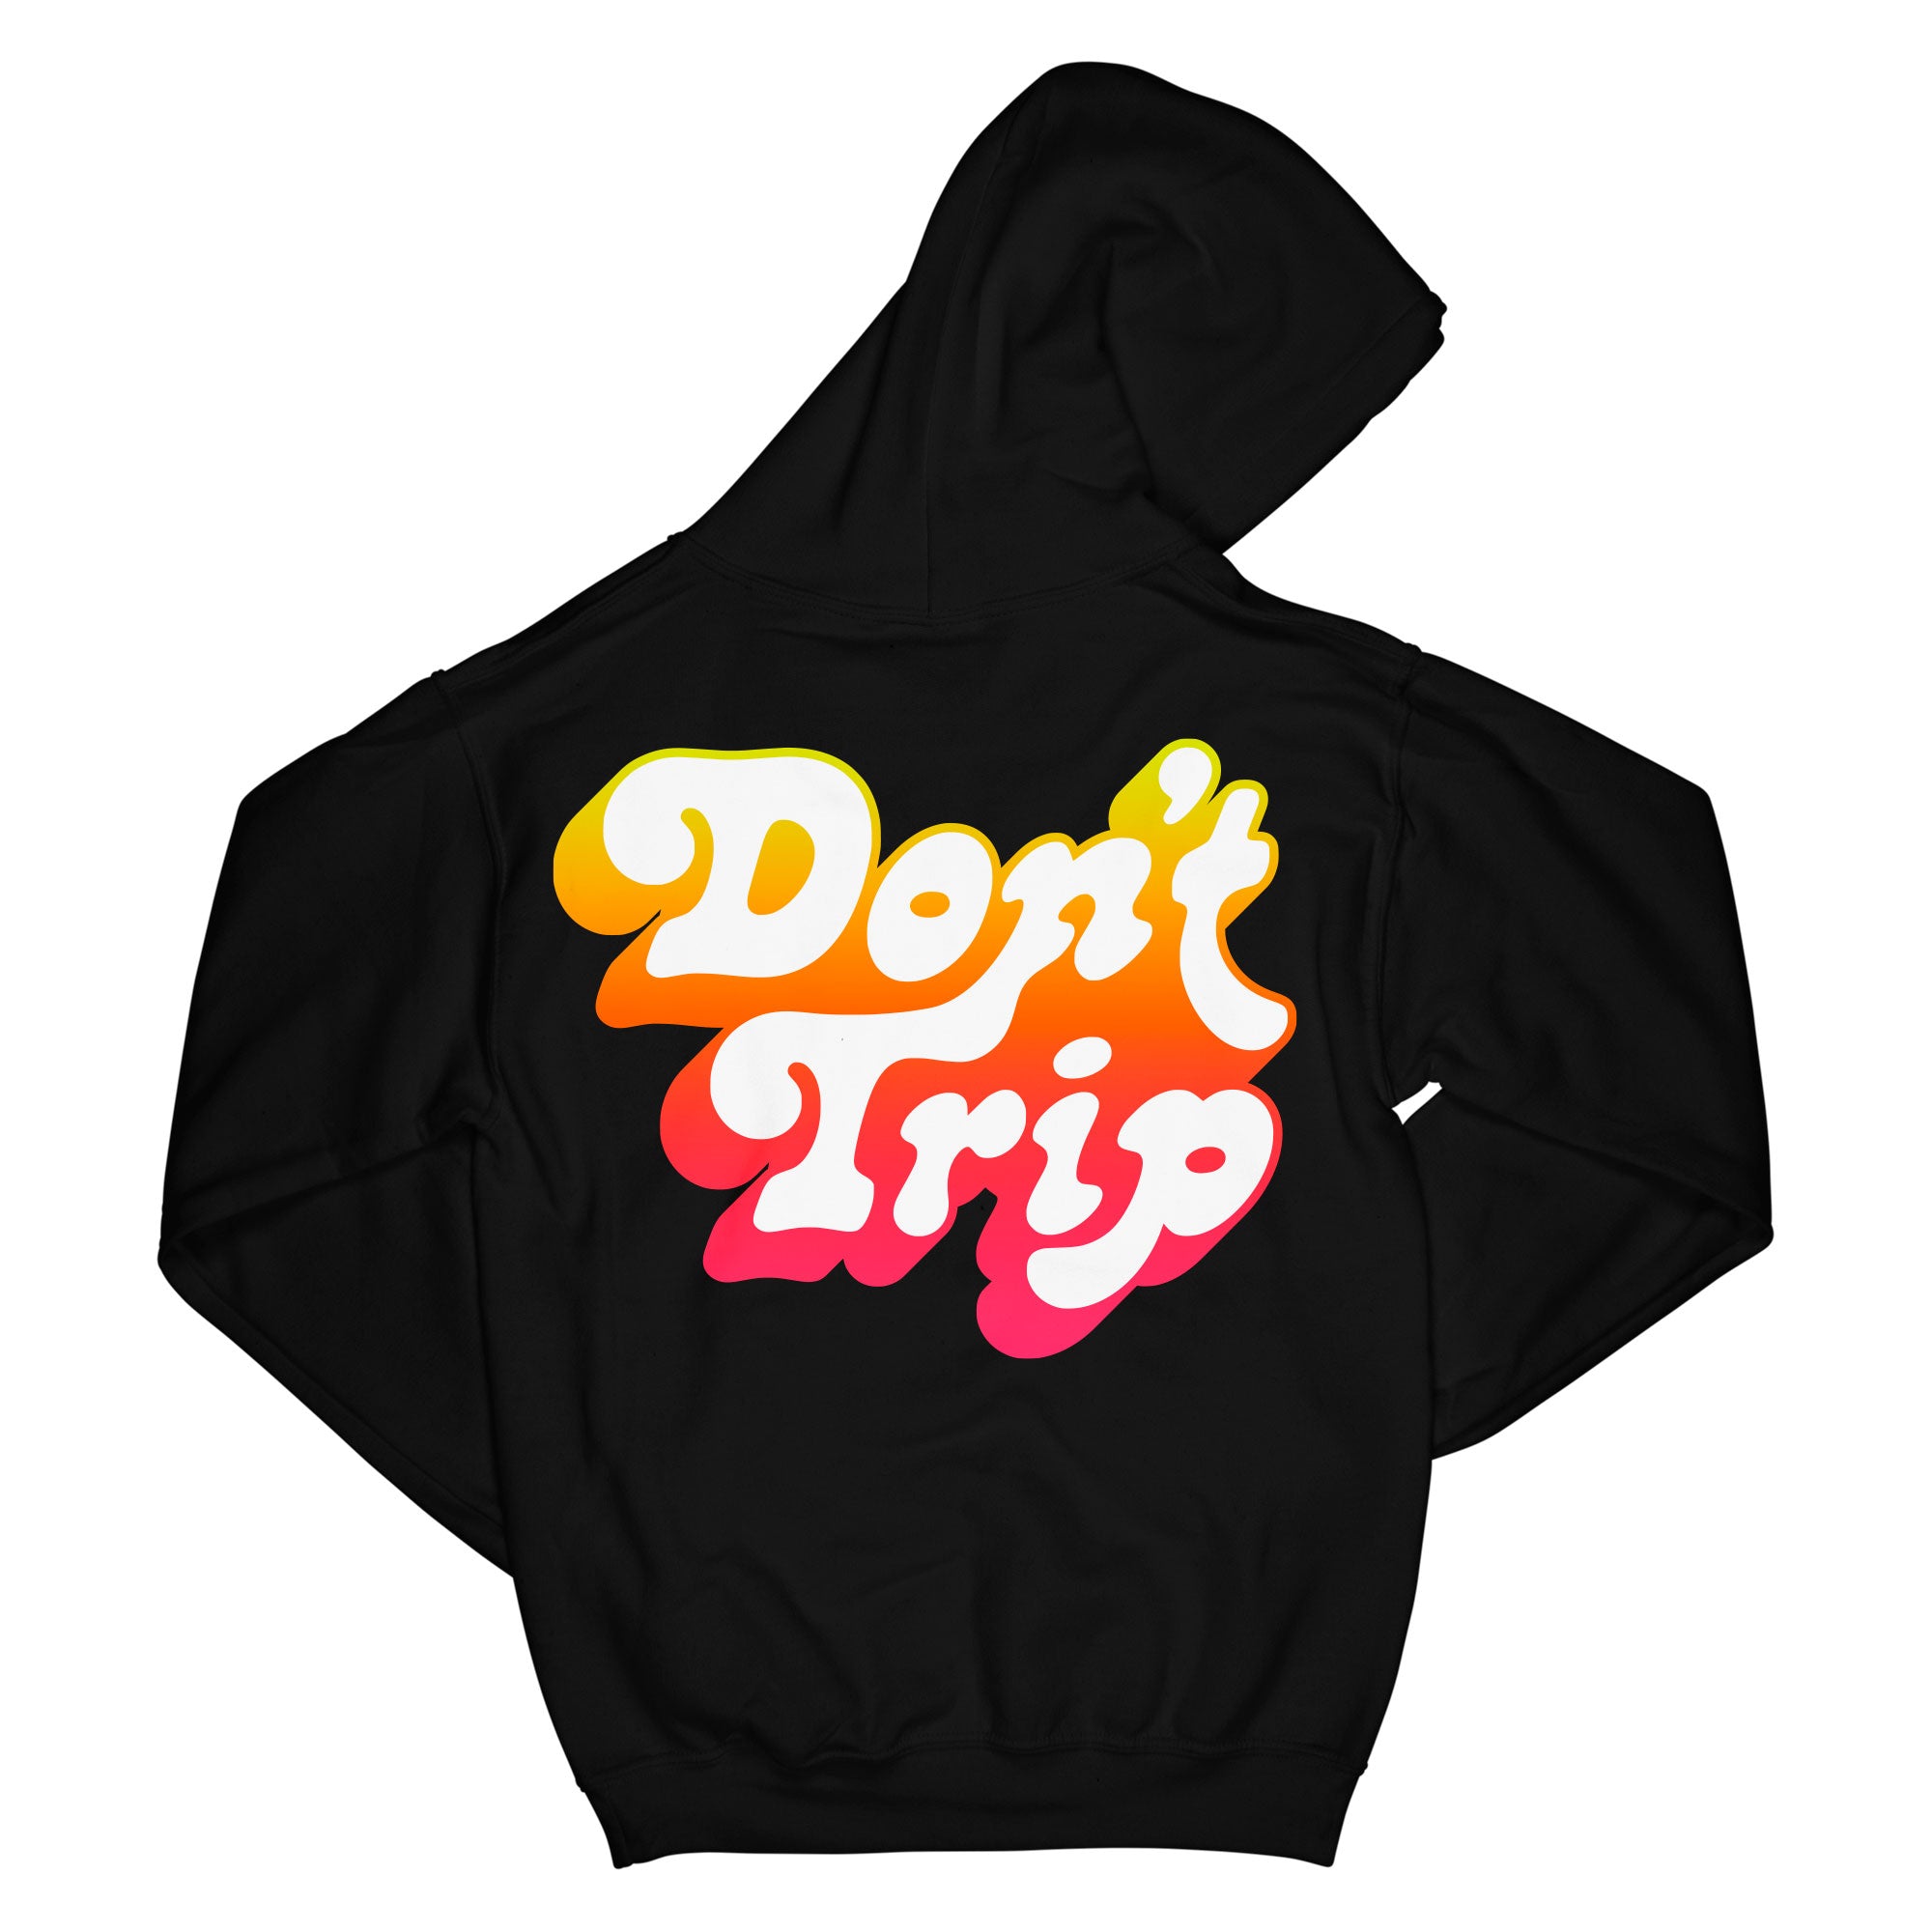 Don't Trip OG Hoodie in black with multicolor Don't Trip logo design on back on a white background - Free & Easy